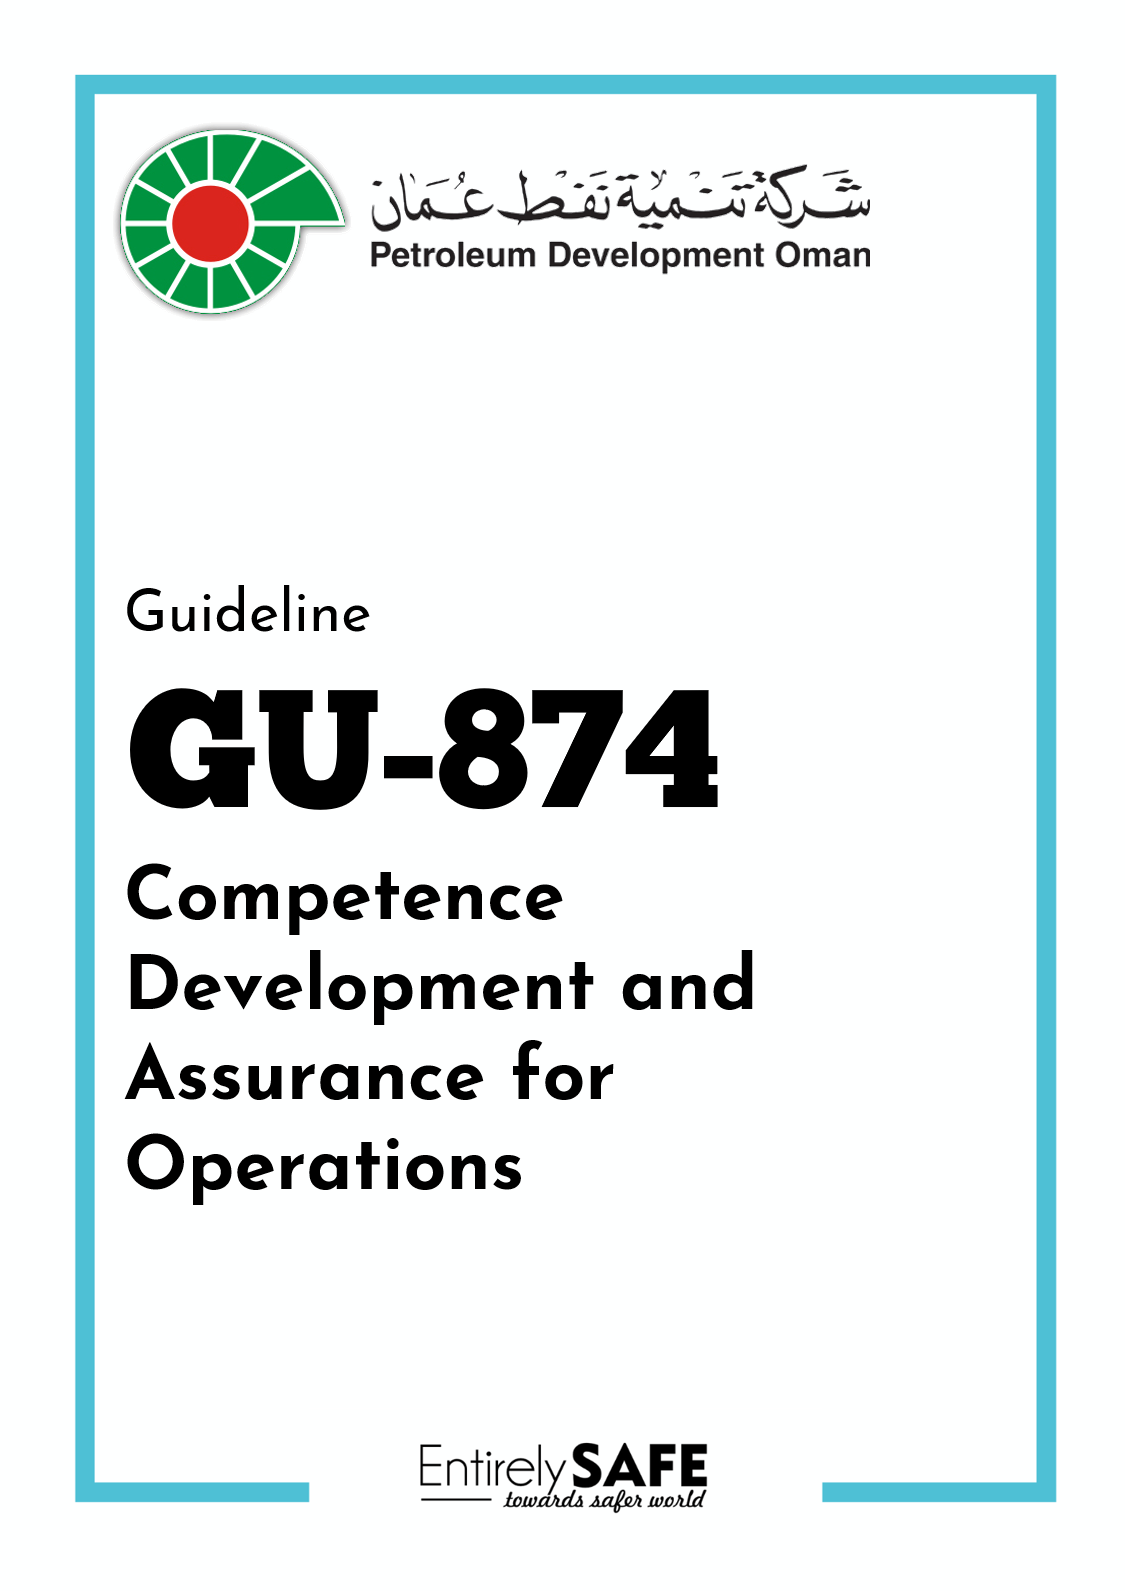 GU-874-Competence-Development-and-Assurance-for-Operations-PDO-download